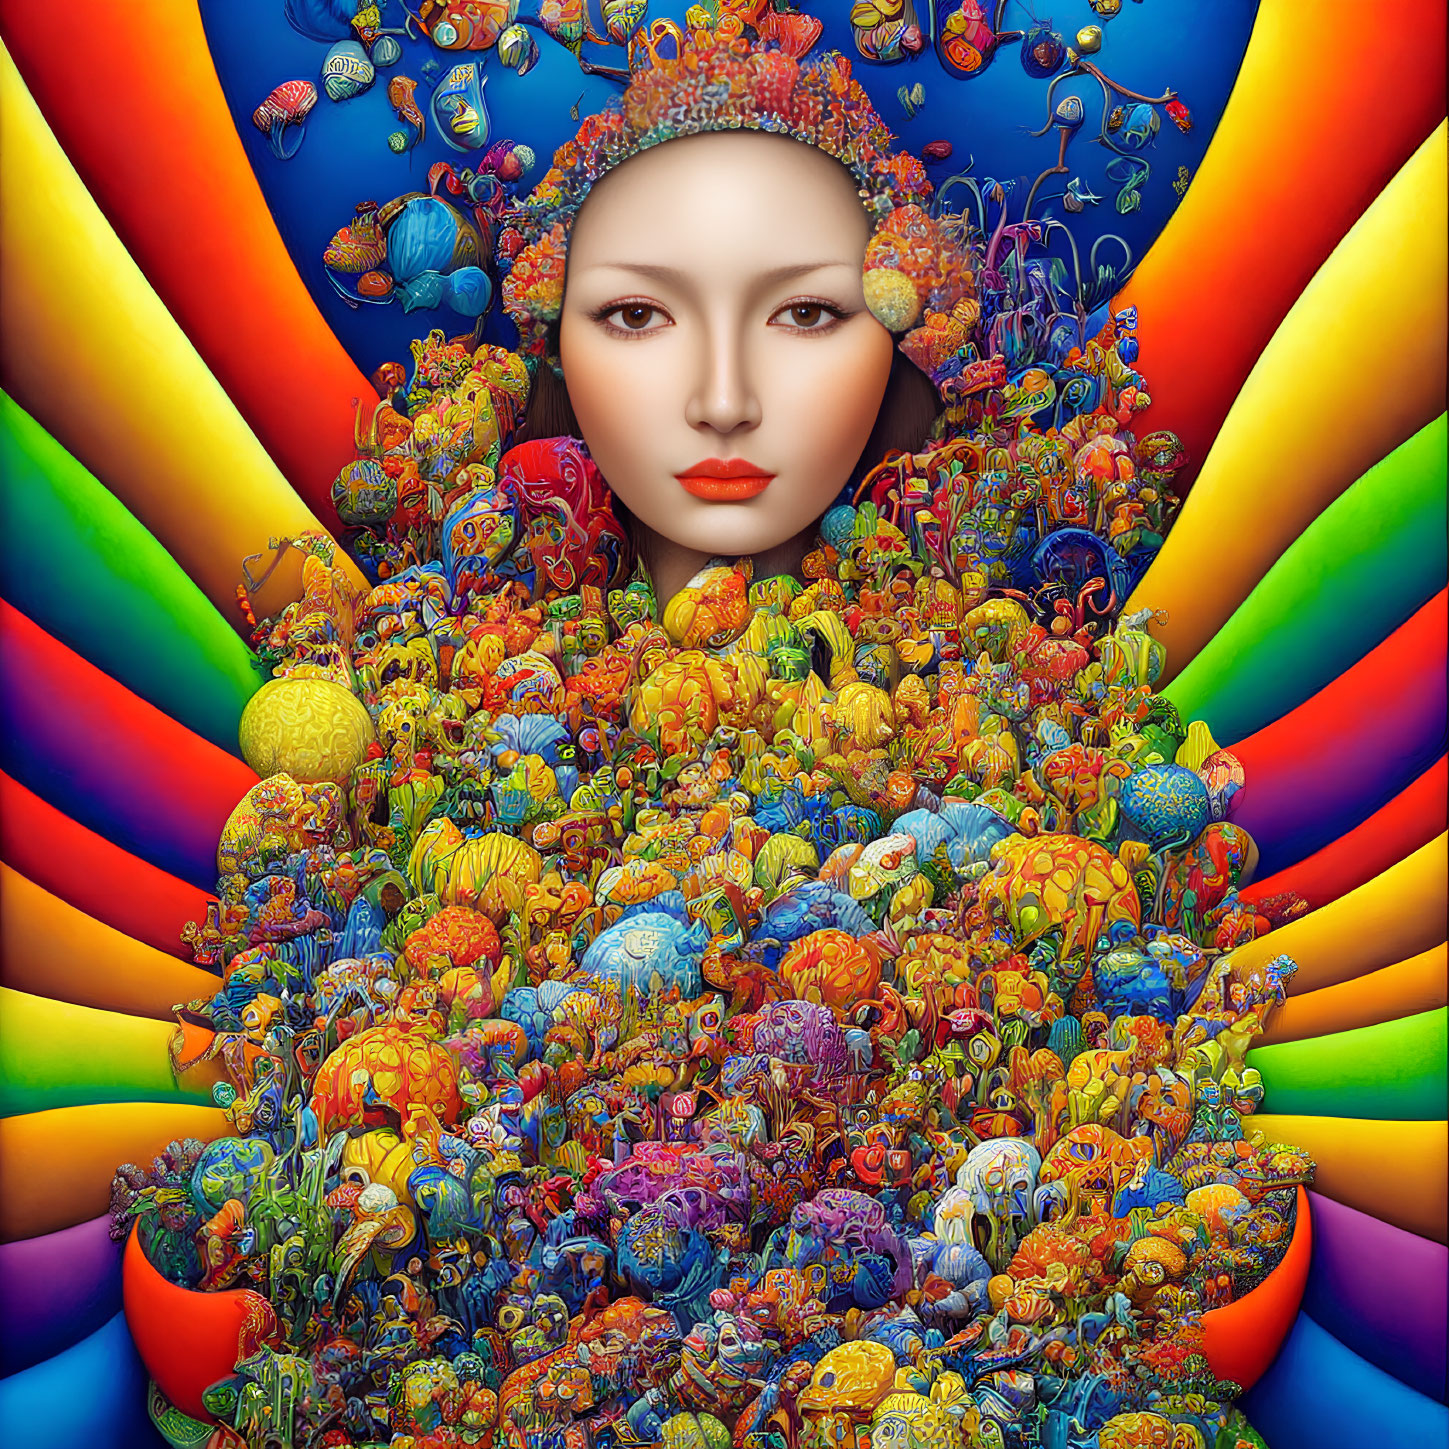 Colorful surreal portrait with female face and whimsical creatures against rainbow backdrop